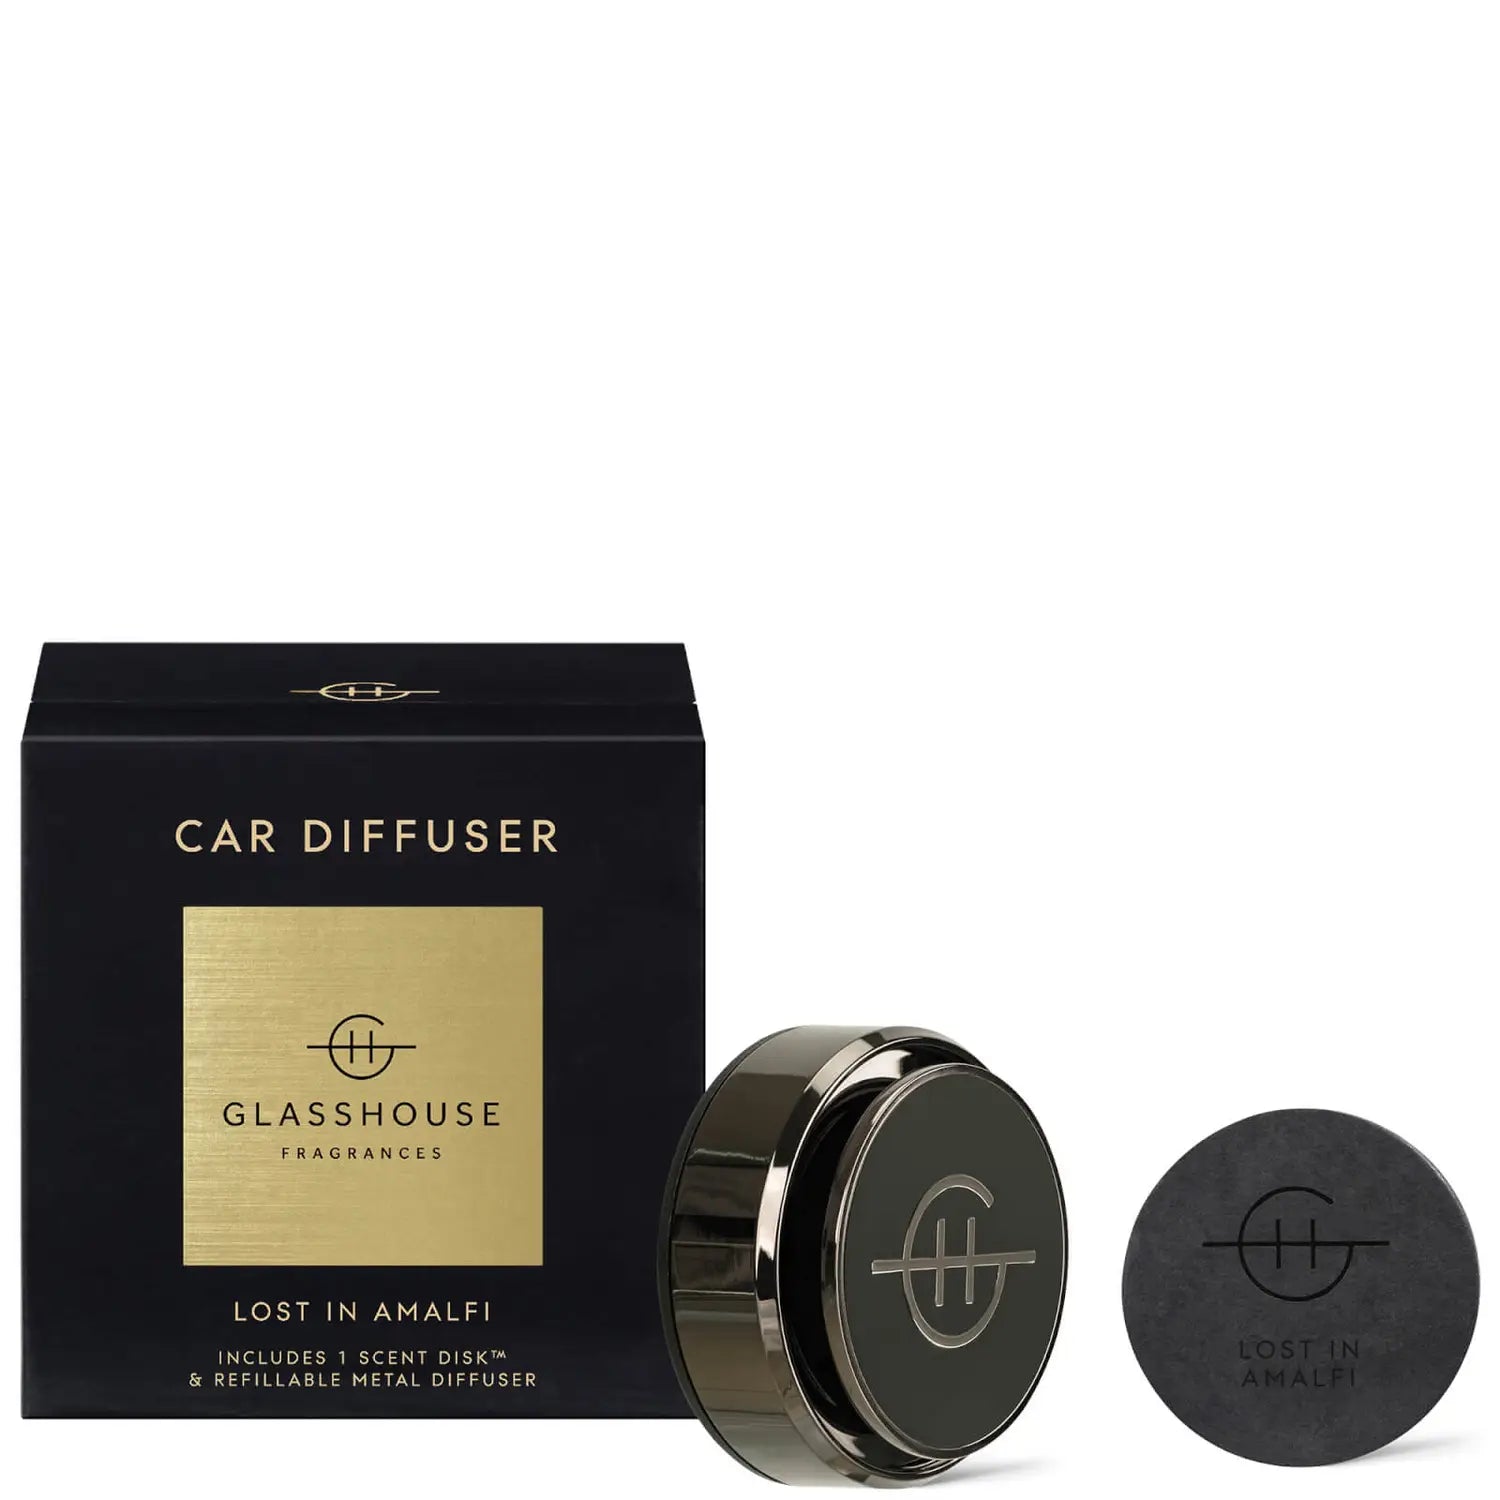 GF Black Car Diffuser with 1 replacement - LOST IN AMALFI